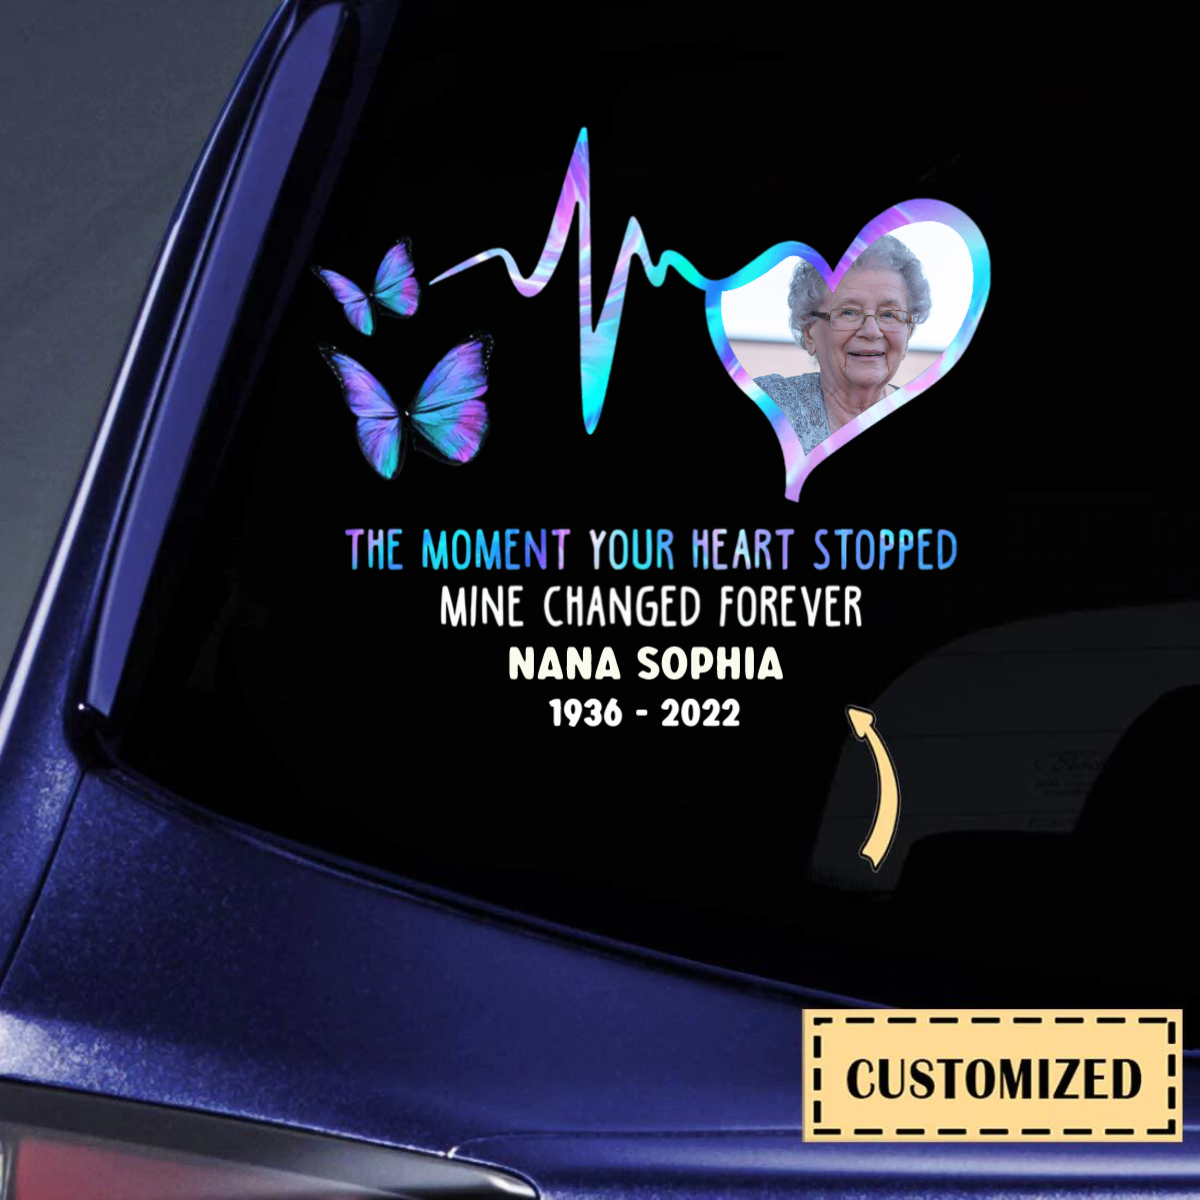 Personalized The Moment Your Heart Stopped Upload Photo Decal